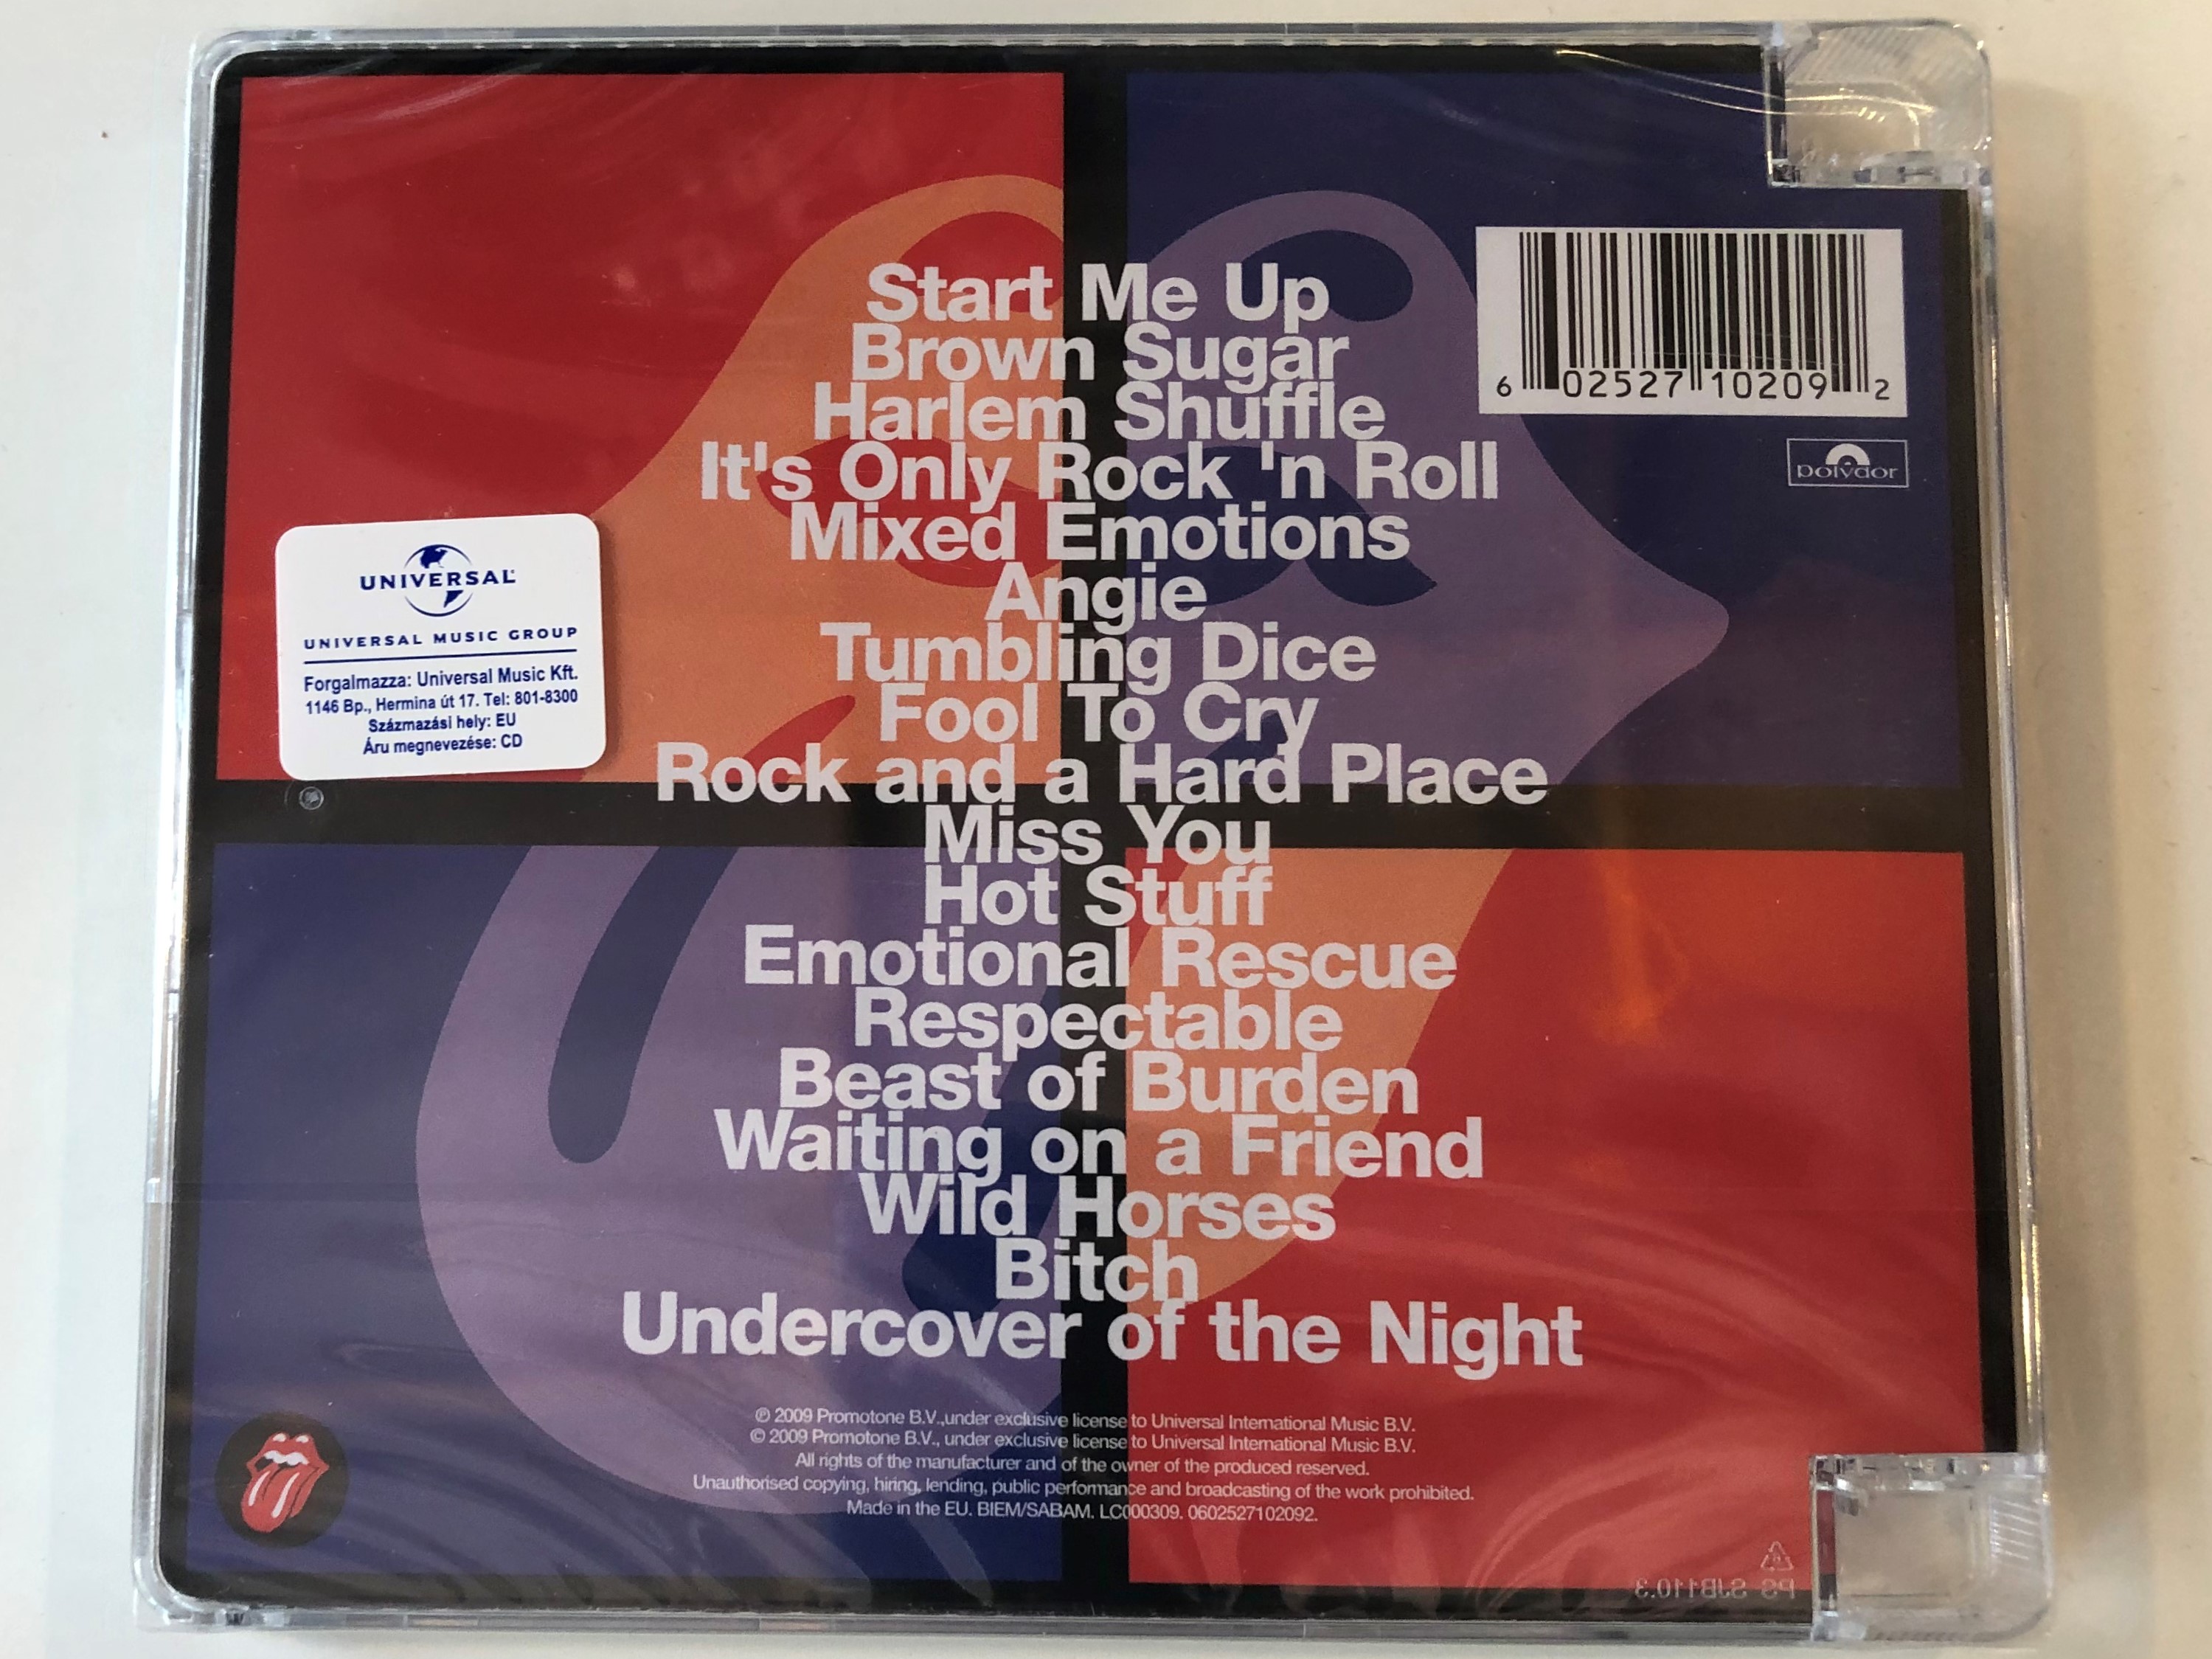 the-best-of-the-rolling-stones-jump-back-71-93-includes...-brown-sugar-wild-horses-hot-stuff-start-me-up-polydor-audio-cd-2009-0602527102092-2-.jpg